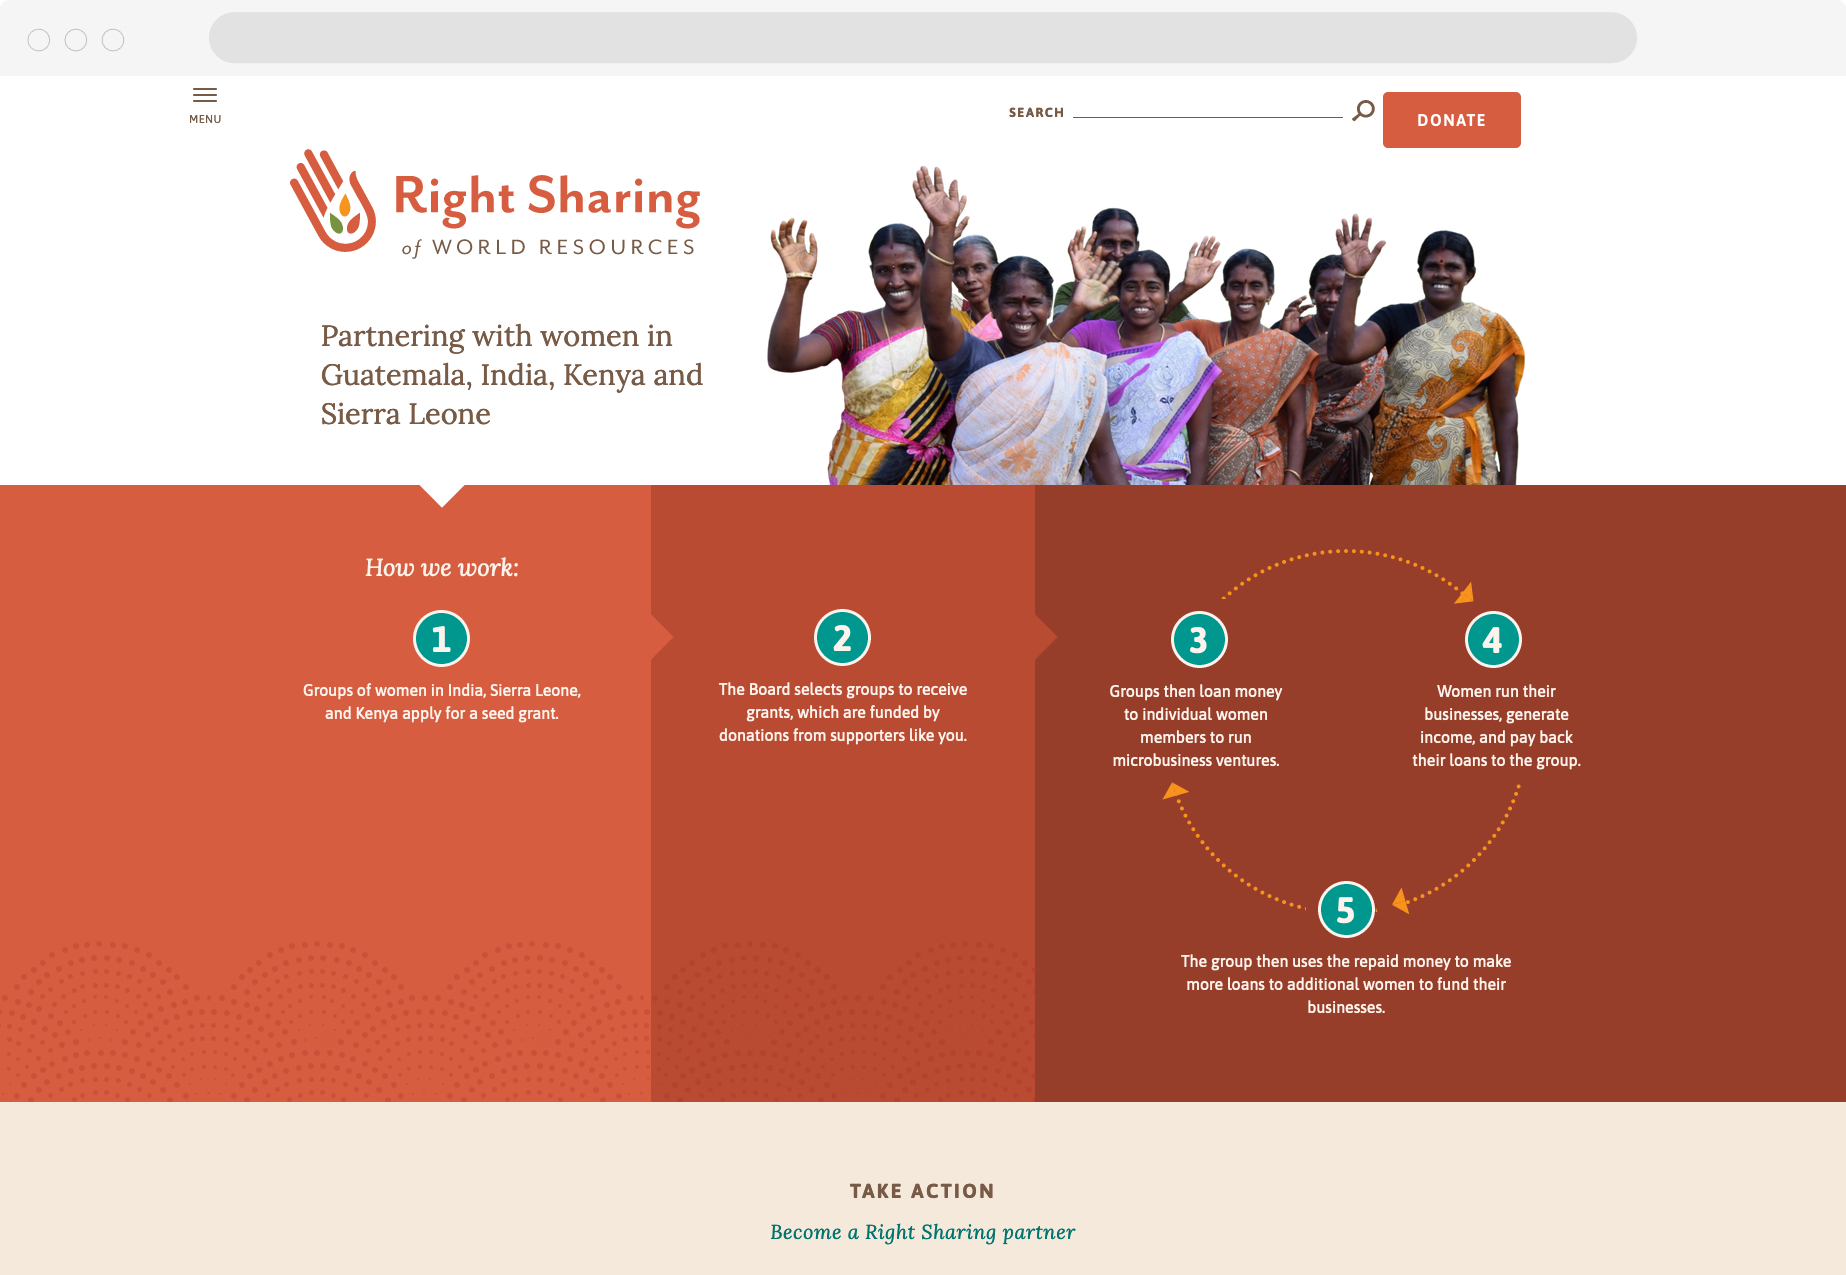 A homepage with the lead "Partnering with women in Guatemala, India, Kenya, and Sierra Leone", an image with a group of people smiling and waving, and below a 5-phase cycle of how RSWR works. 